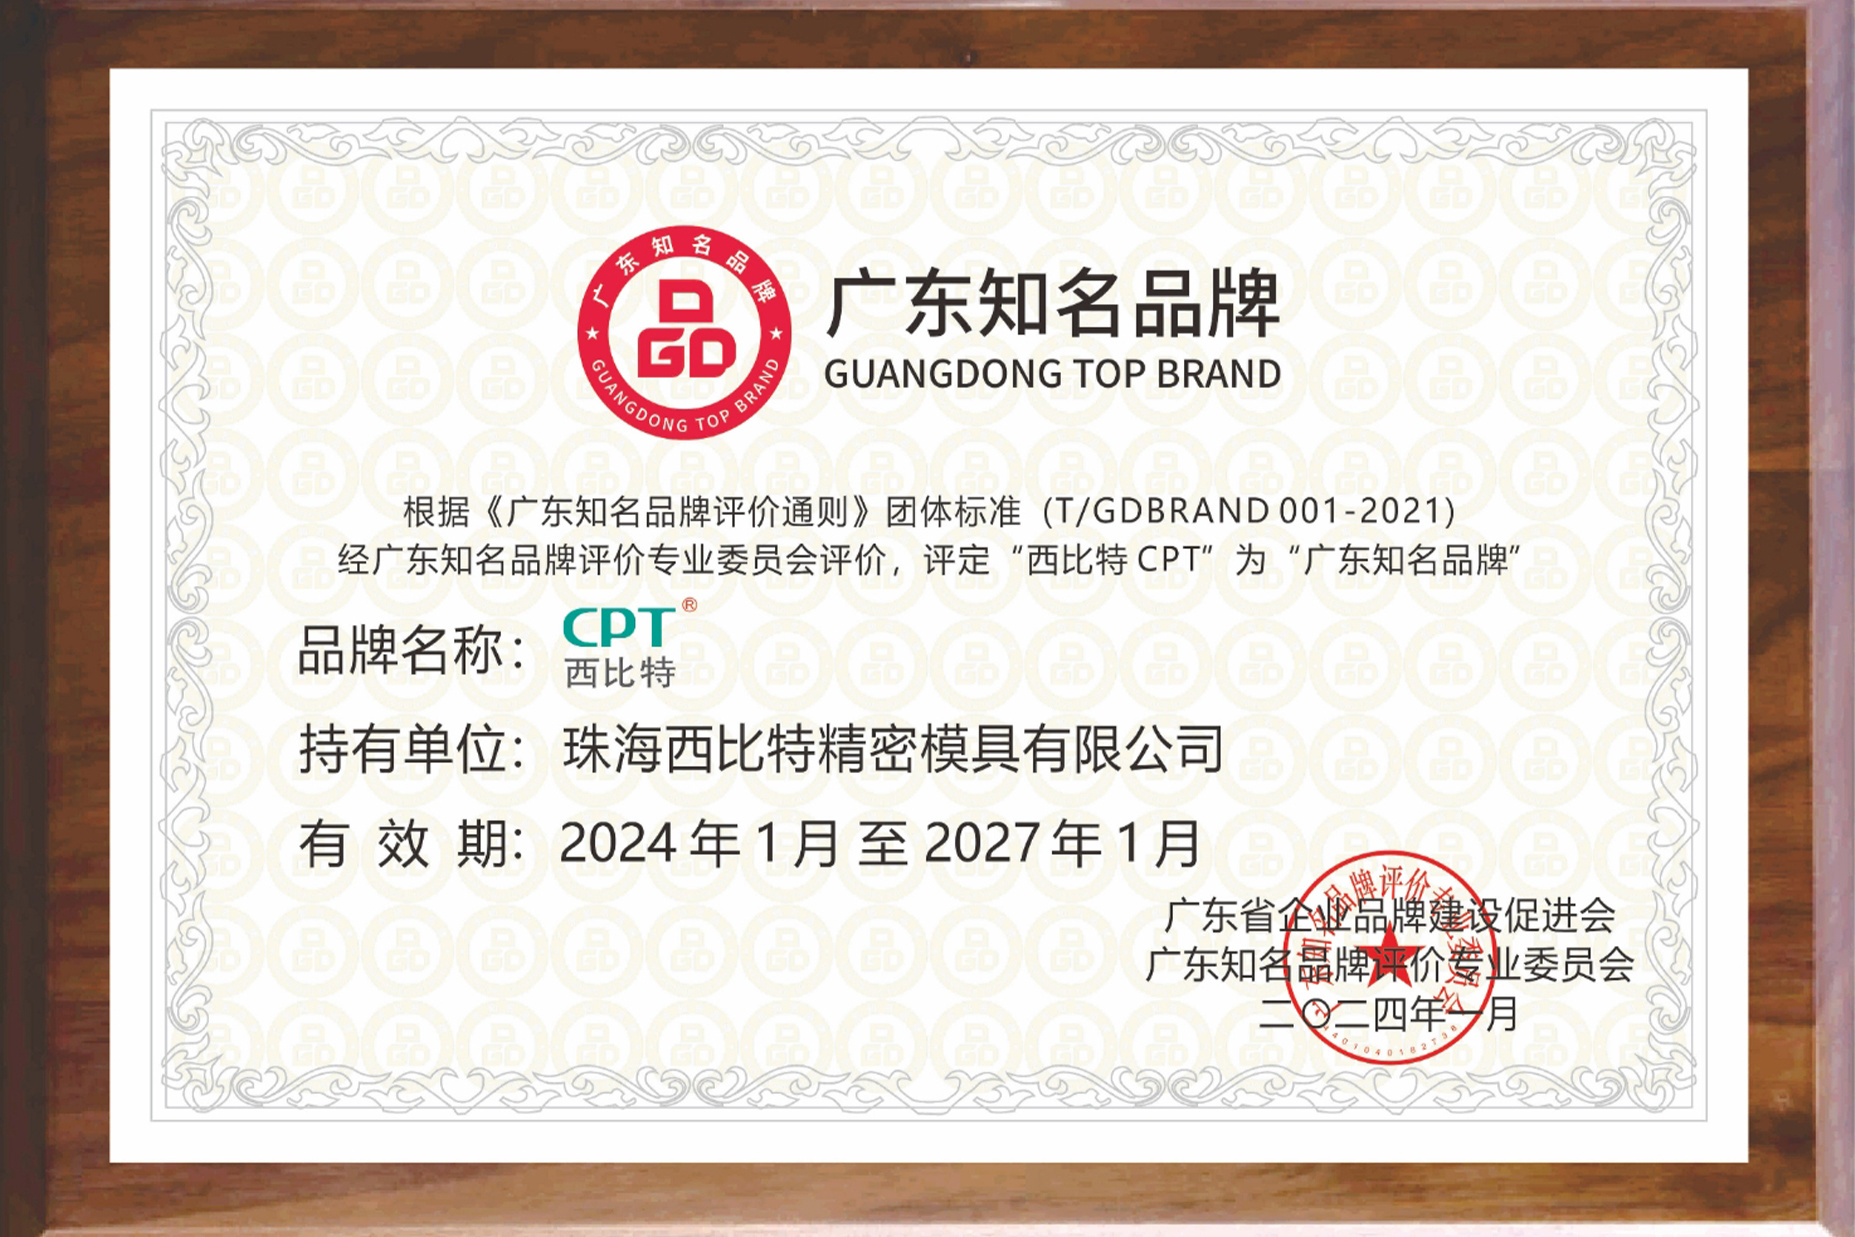 Guangdong Famous Brands